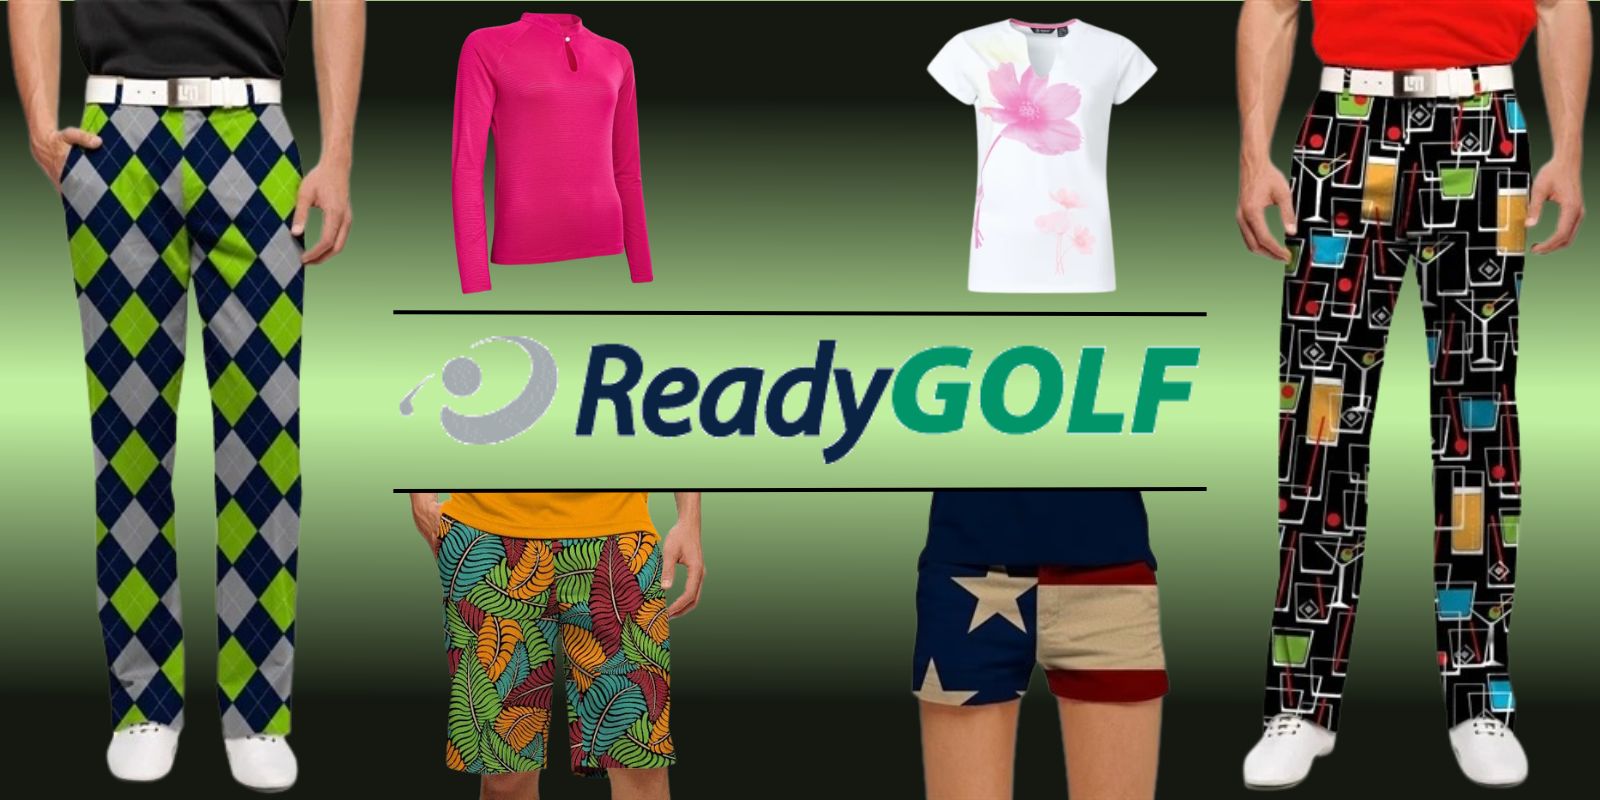 LADIES GOLF APPAREL by ReadyGOLF on Dribbble